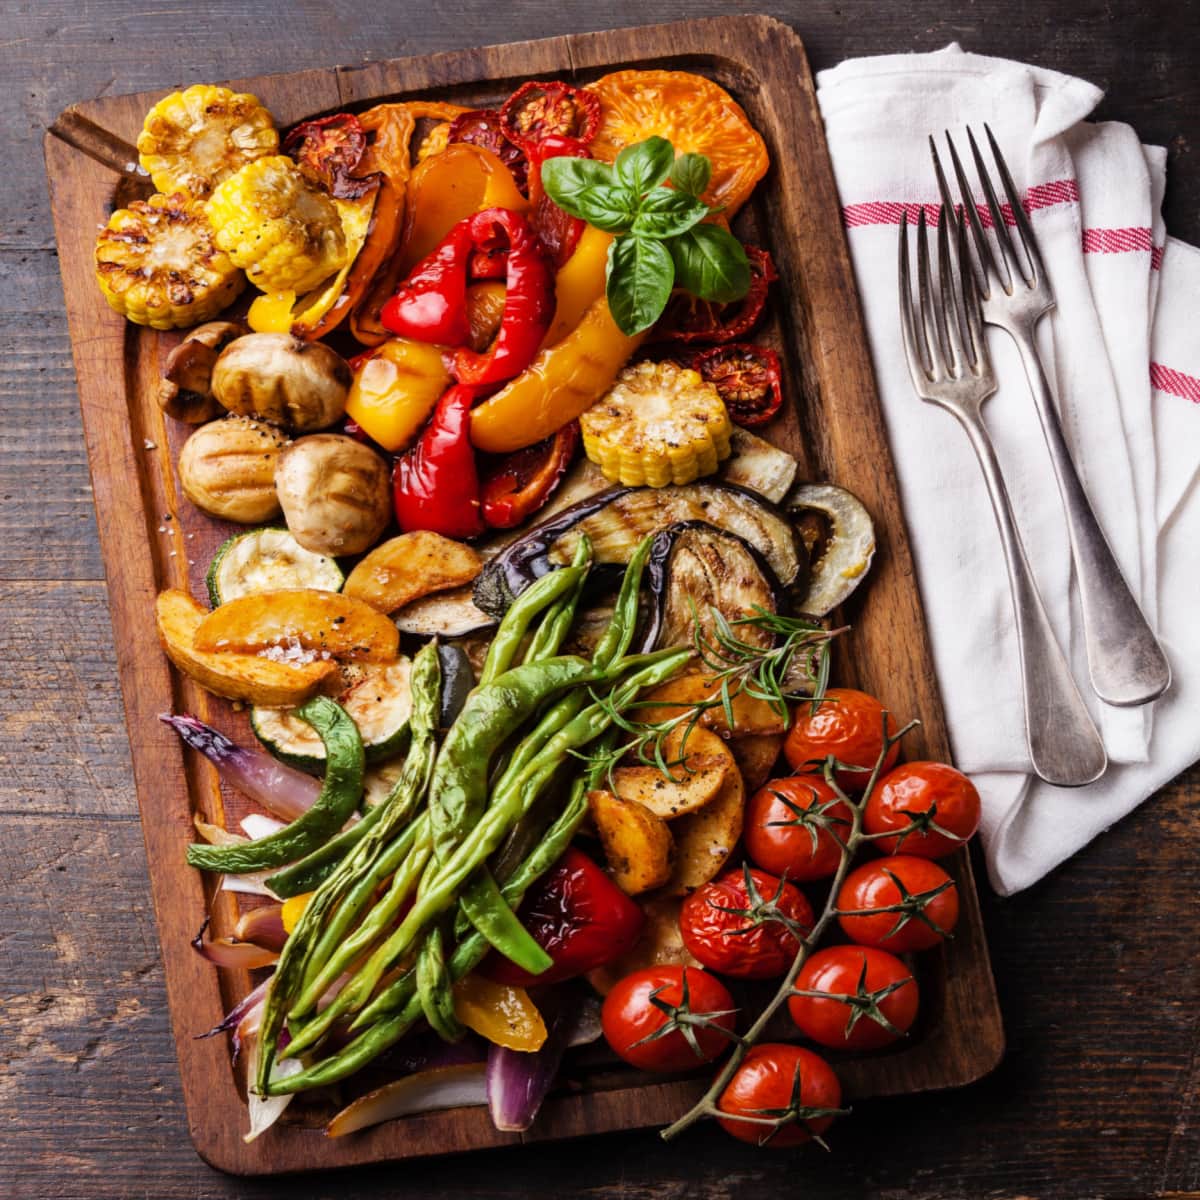 Homemade Grilled Vegetables Including Corn, Tomatoes and Bell Peppers